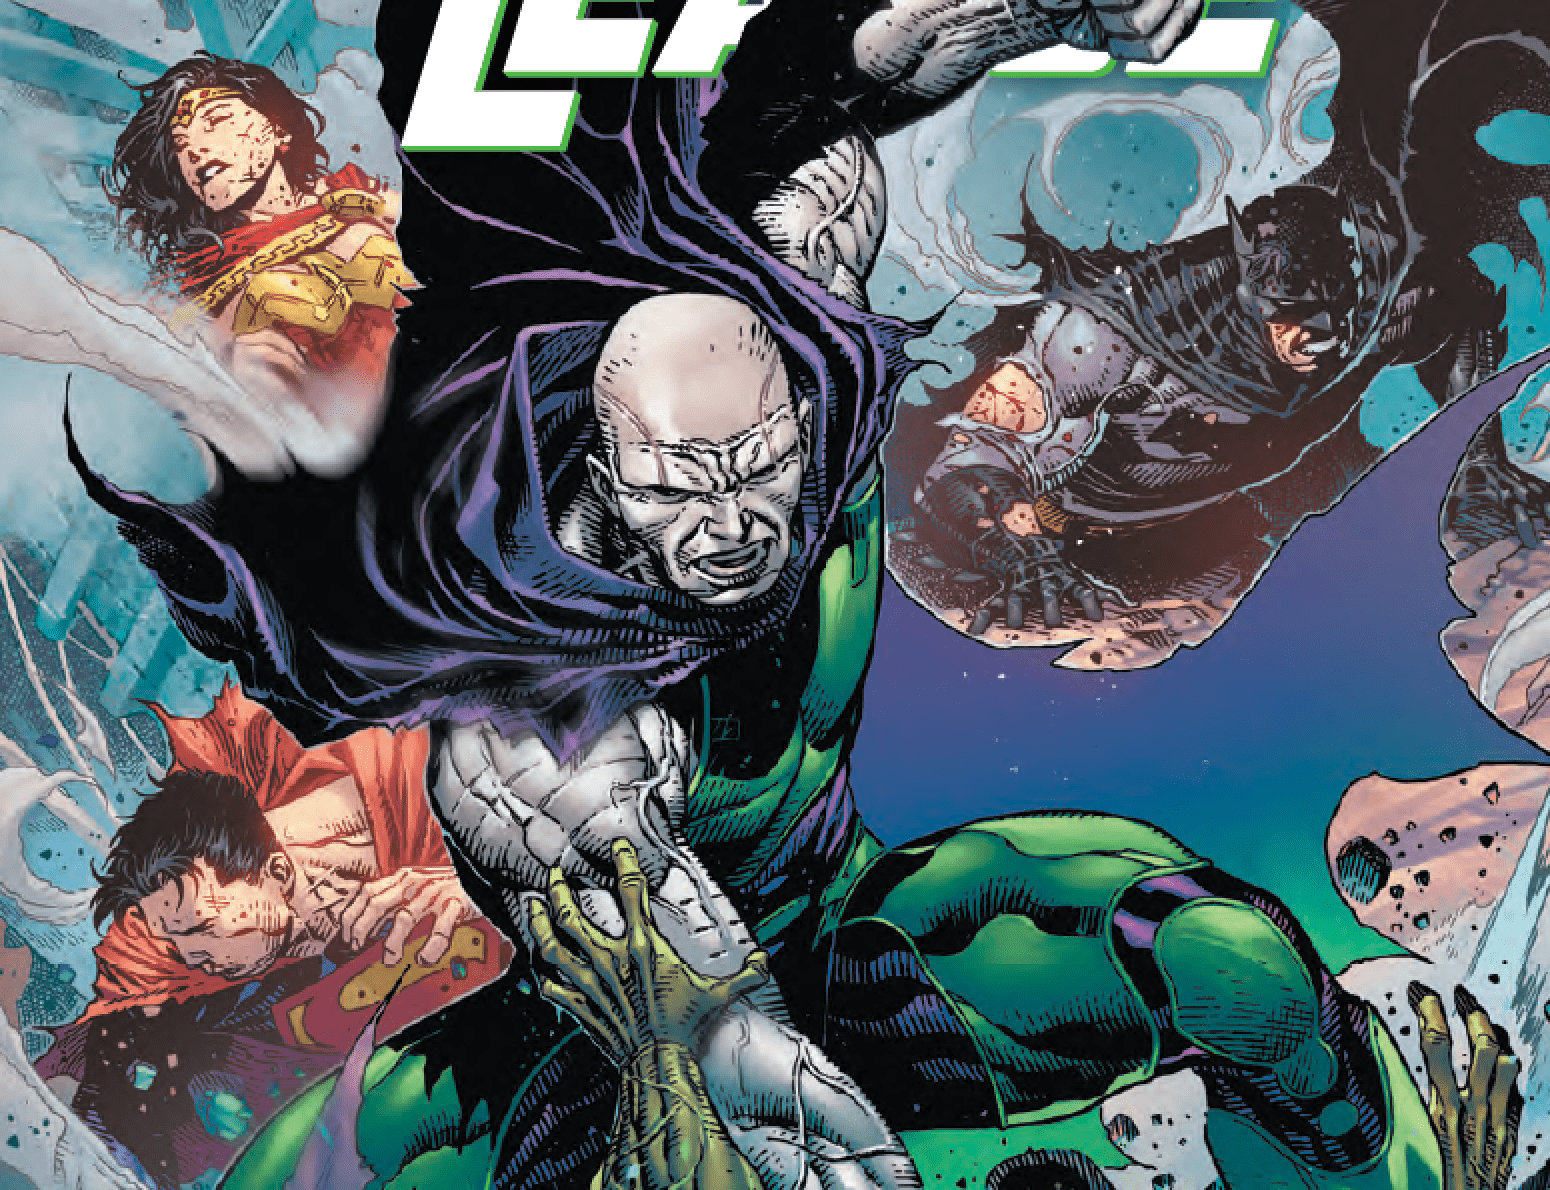 Justice League #28 will change how you think about Lex Luthor